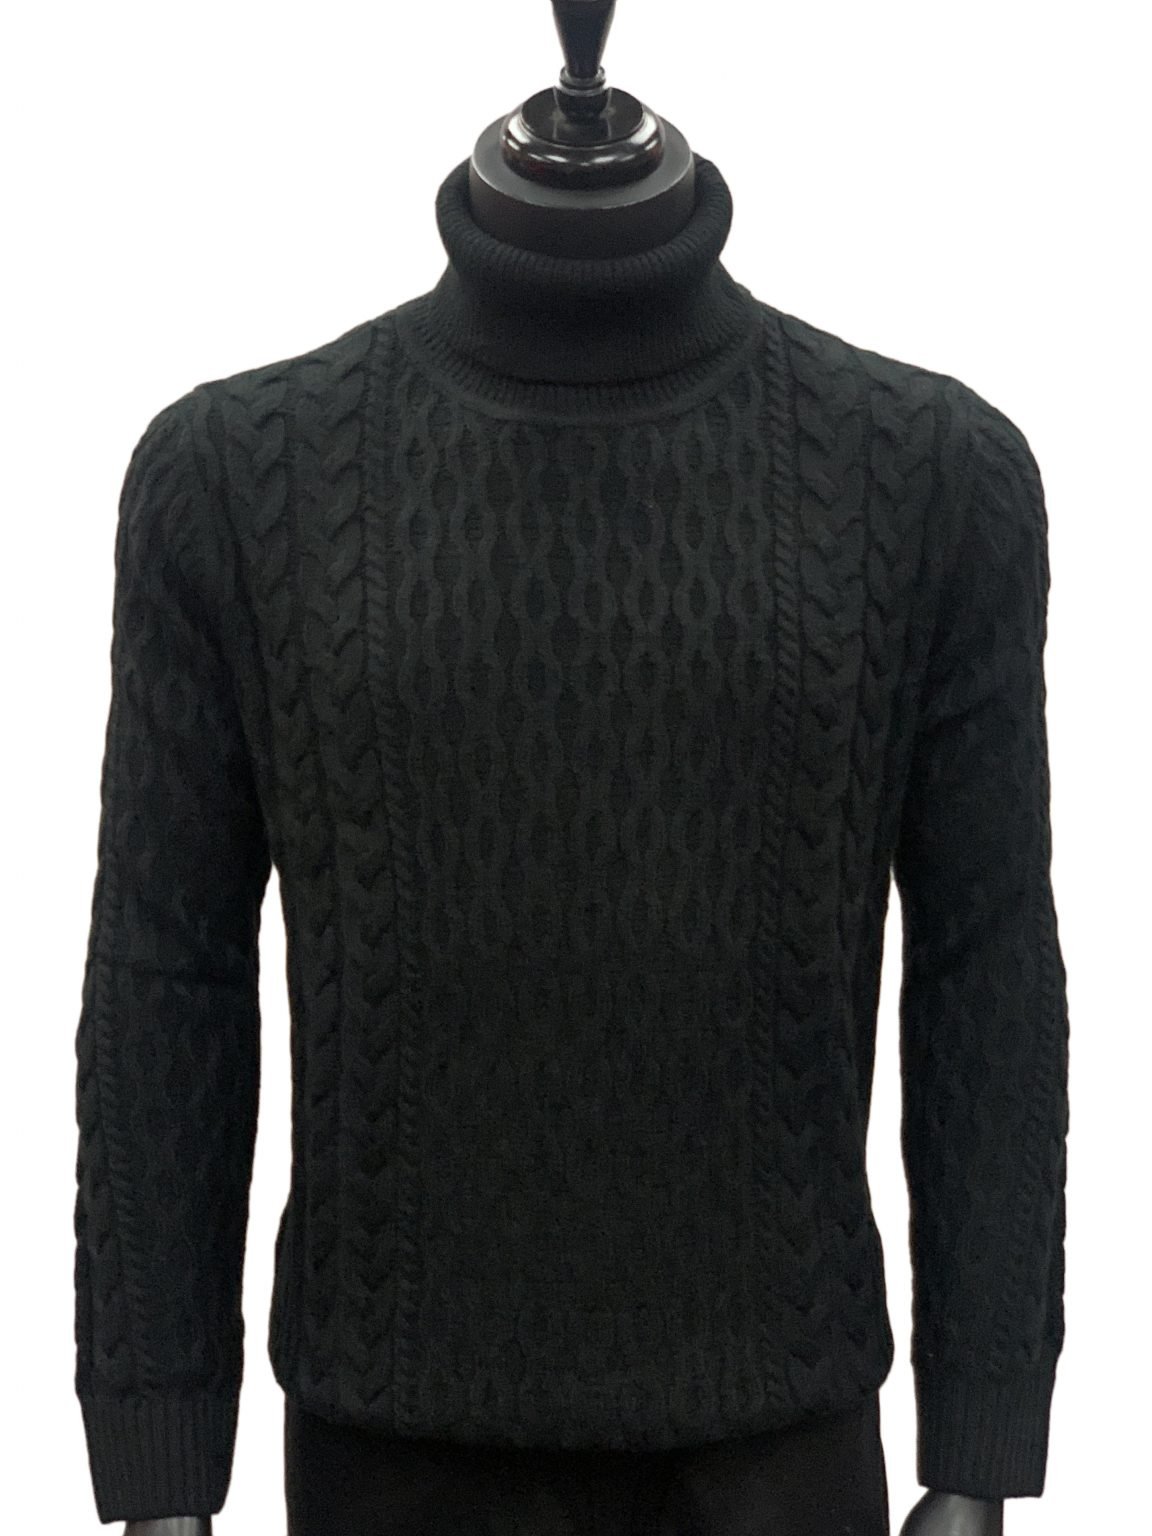 Black Cable Knit Luxurious Soft Wool Blend Bulky Pullover Turtleneck ...